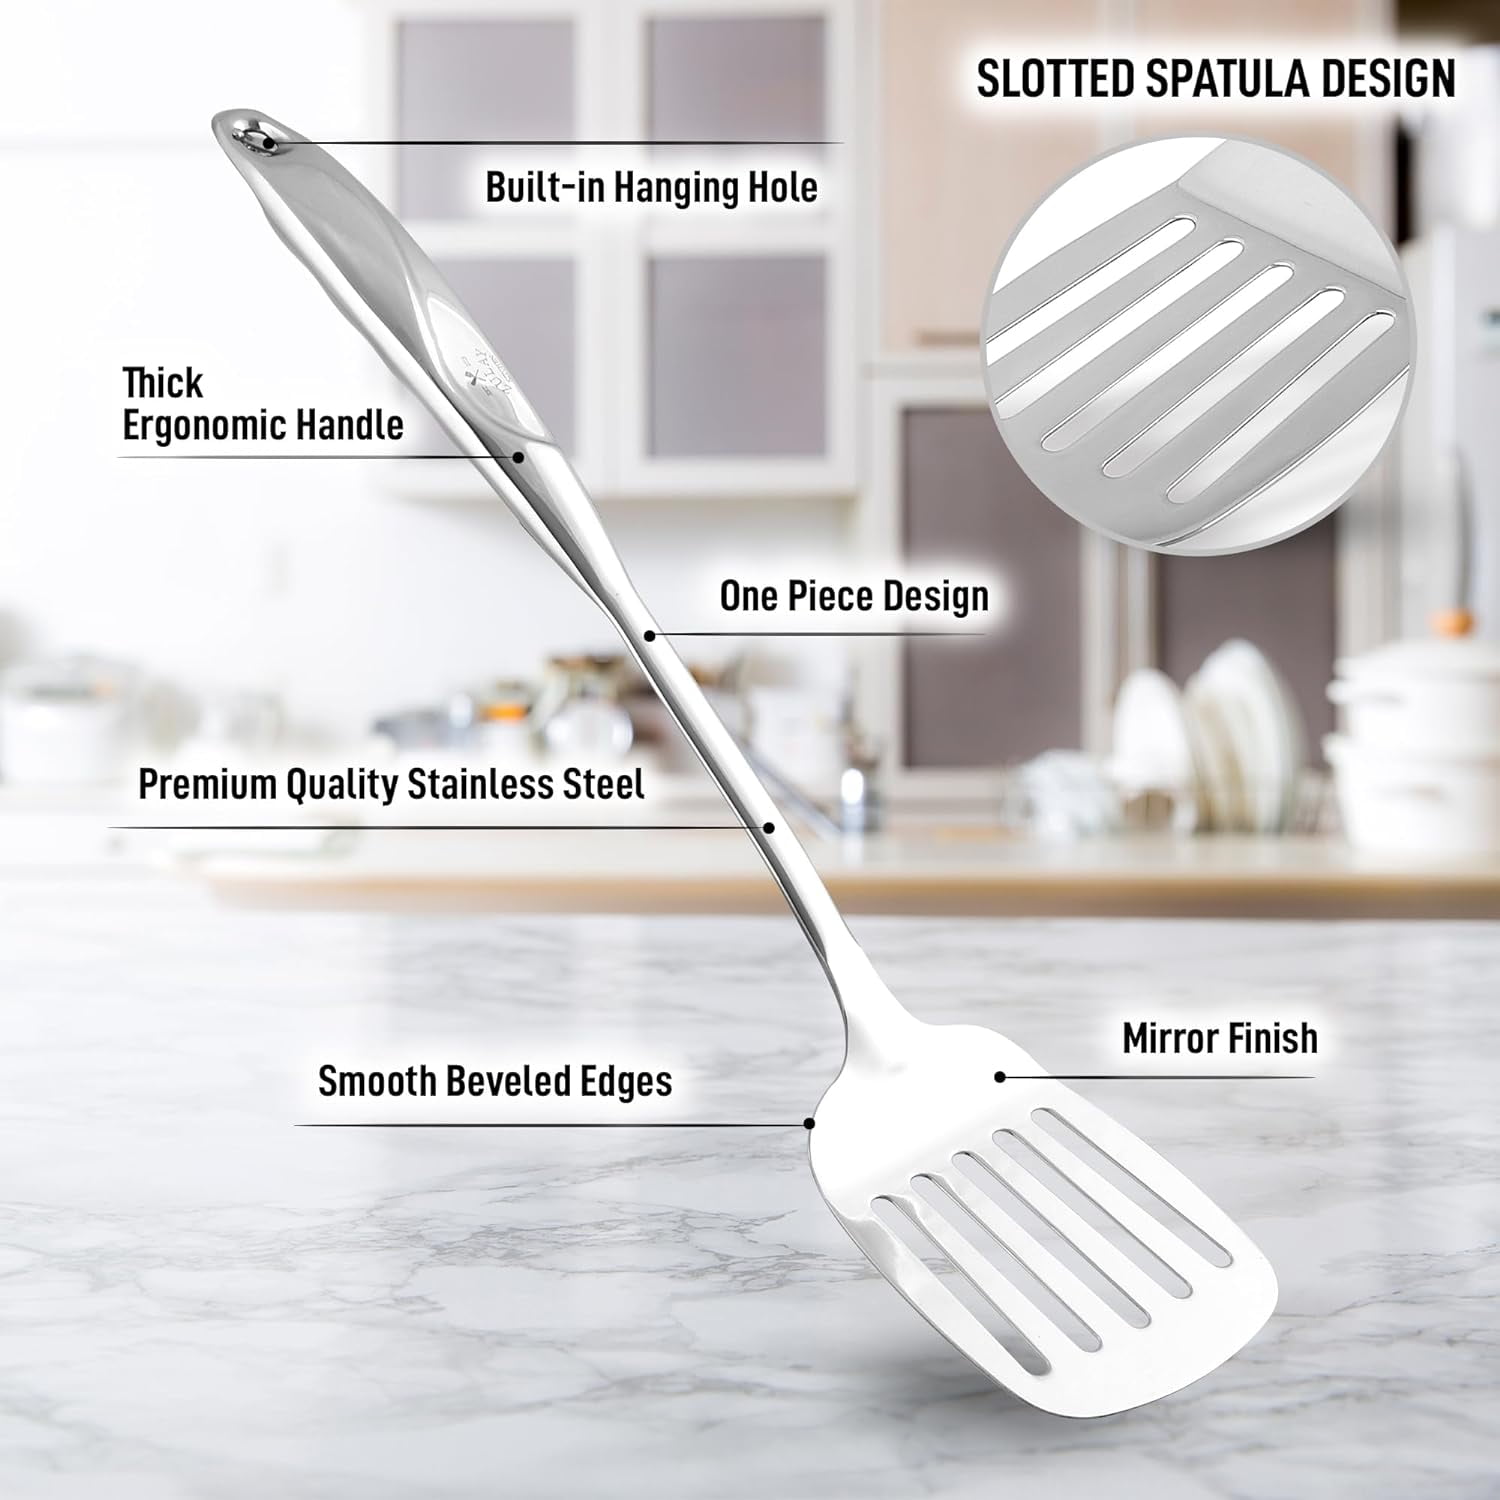 Zulay Kitchen Large Stainless Steel Slotted Skimmer Spoon - 14.5